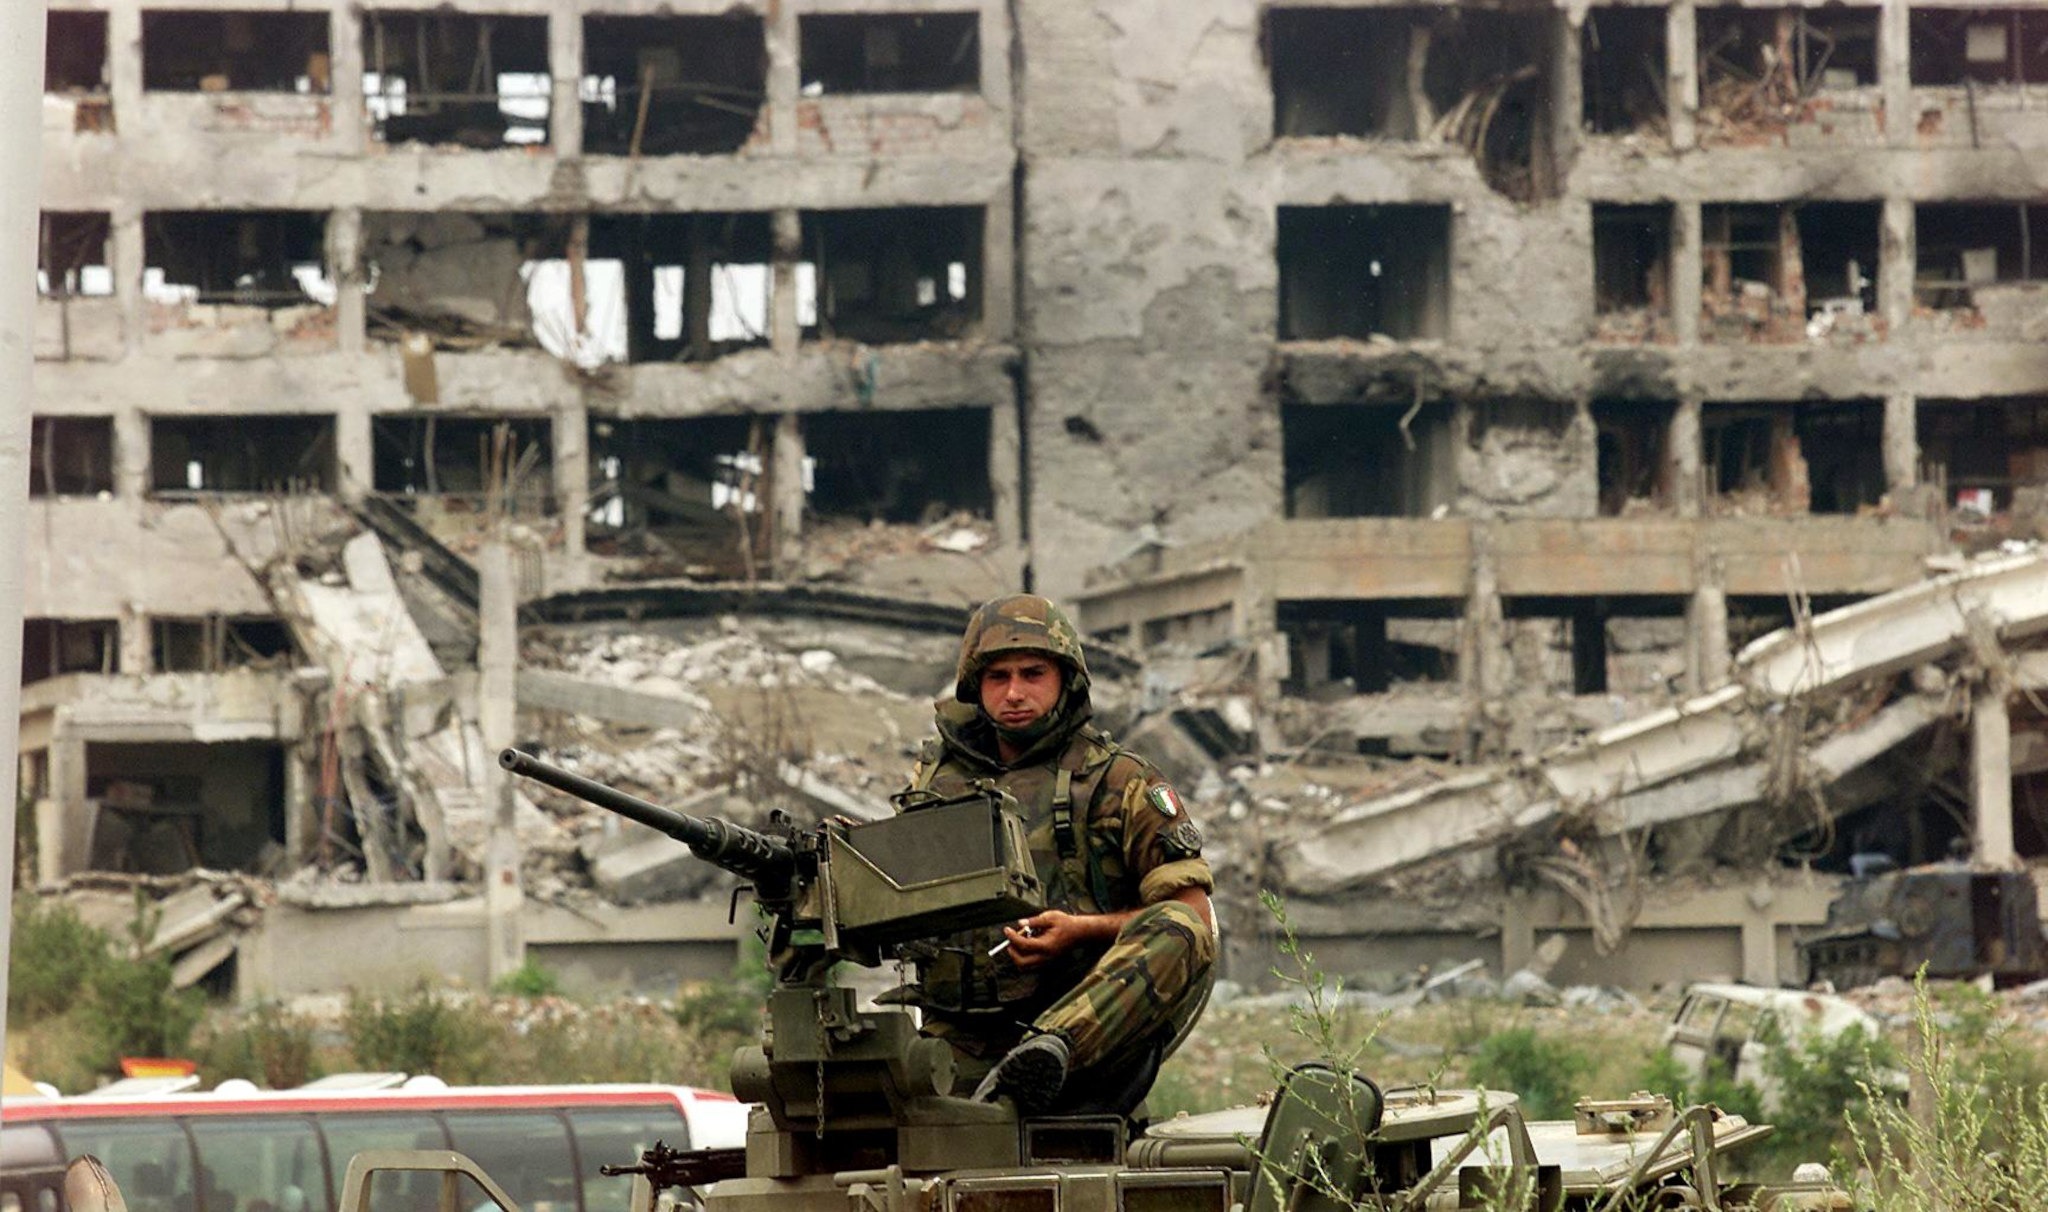 An Italian soldier at a Serb police headquarters destroyed by NATO in Djakovica, Kosovo, in 1999. (Photo: Mike Nelson / AFP via Getty)